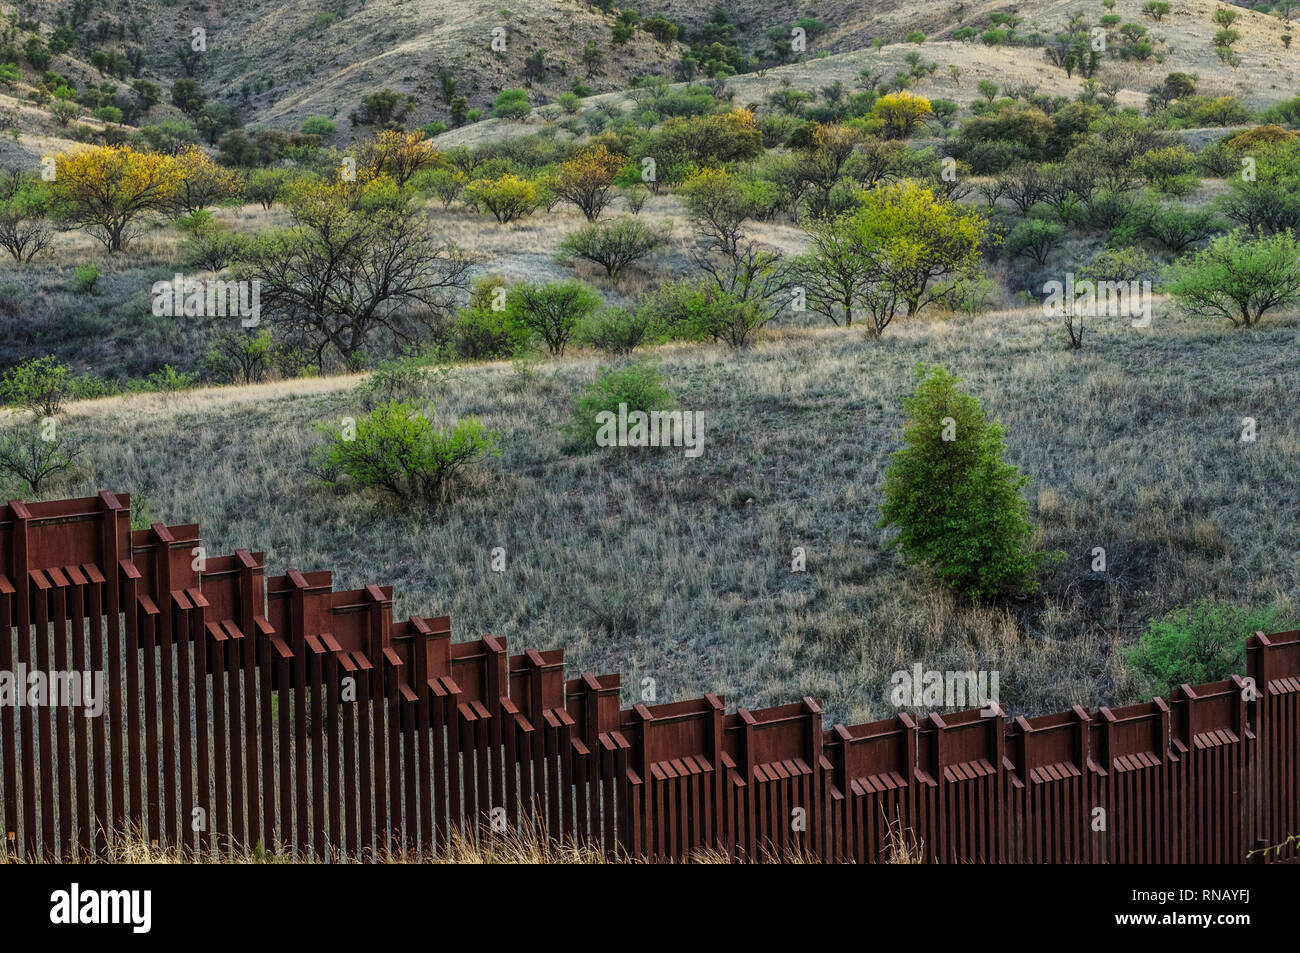 Looking over US border fence into hilly Mexico, bollard style pedestrian barrier, viewed from US side, east of Nogales Arizona, April 2018 Stock Photo